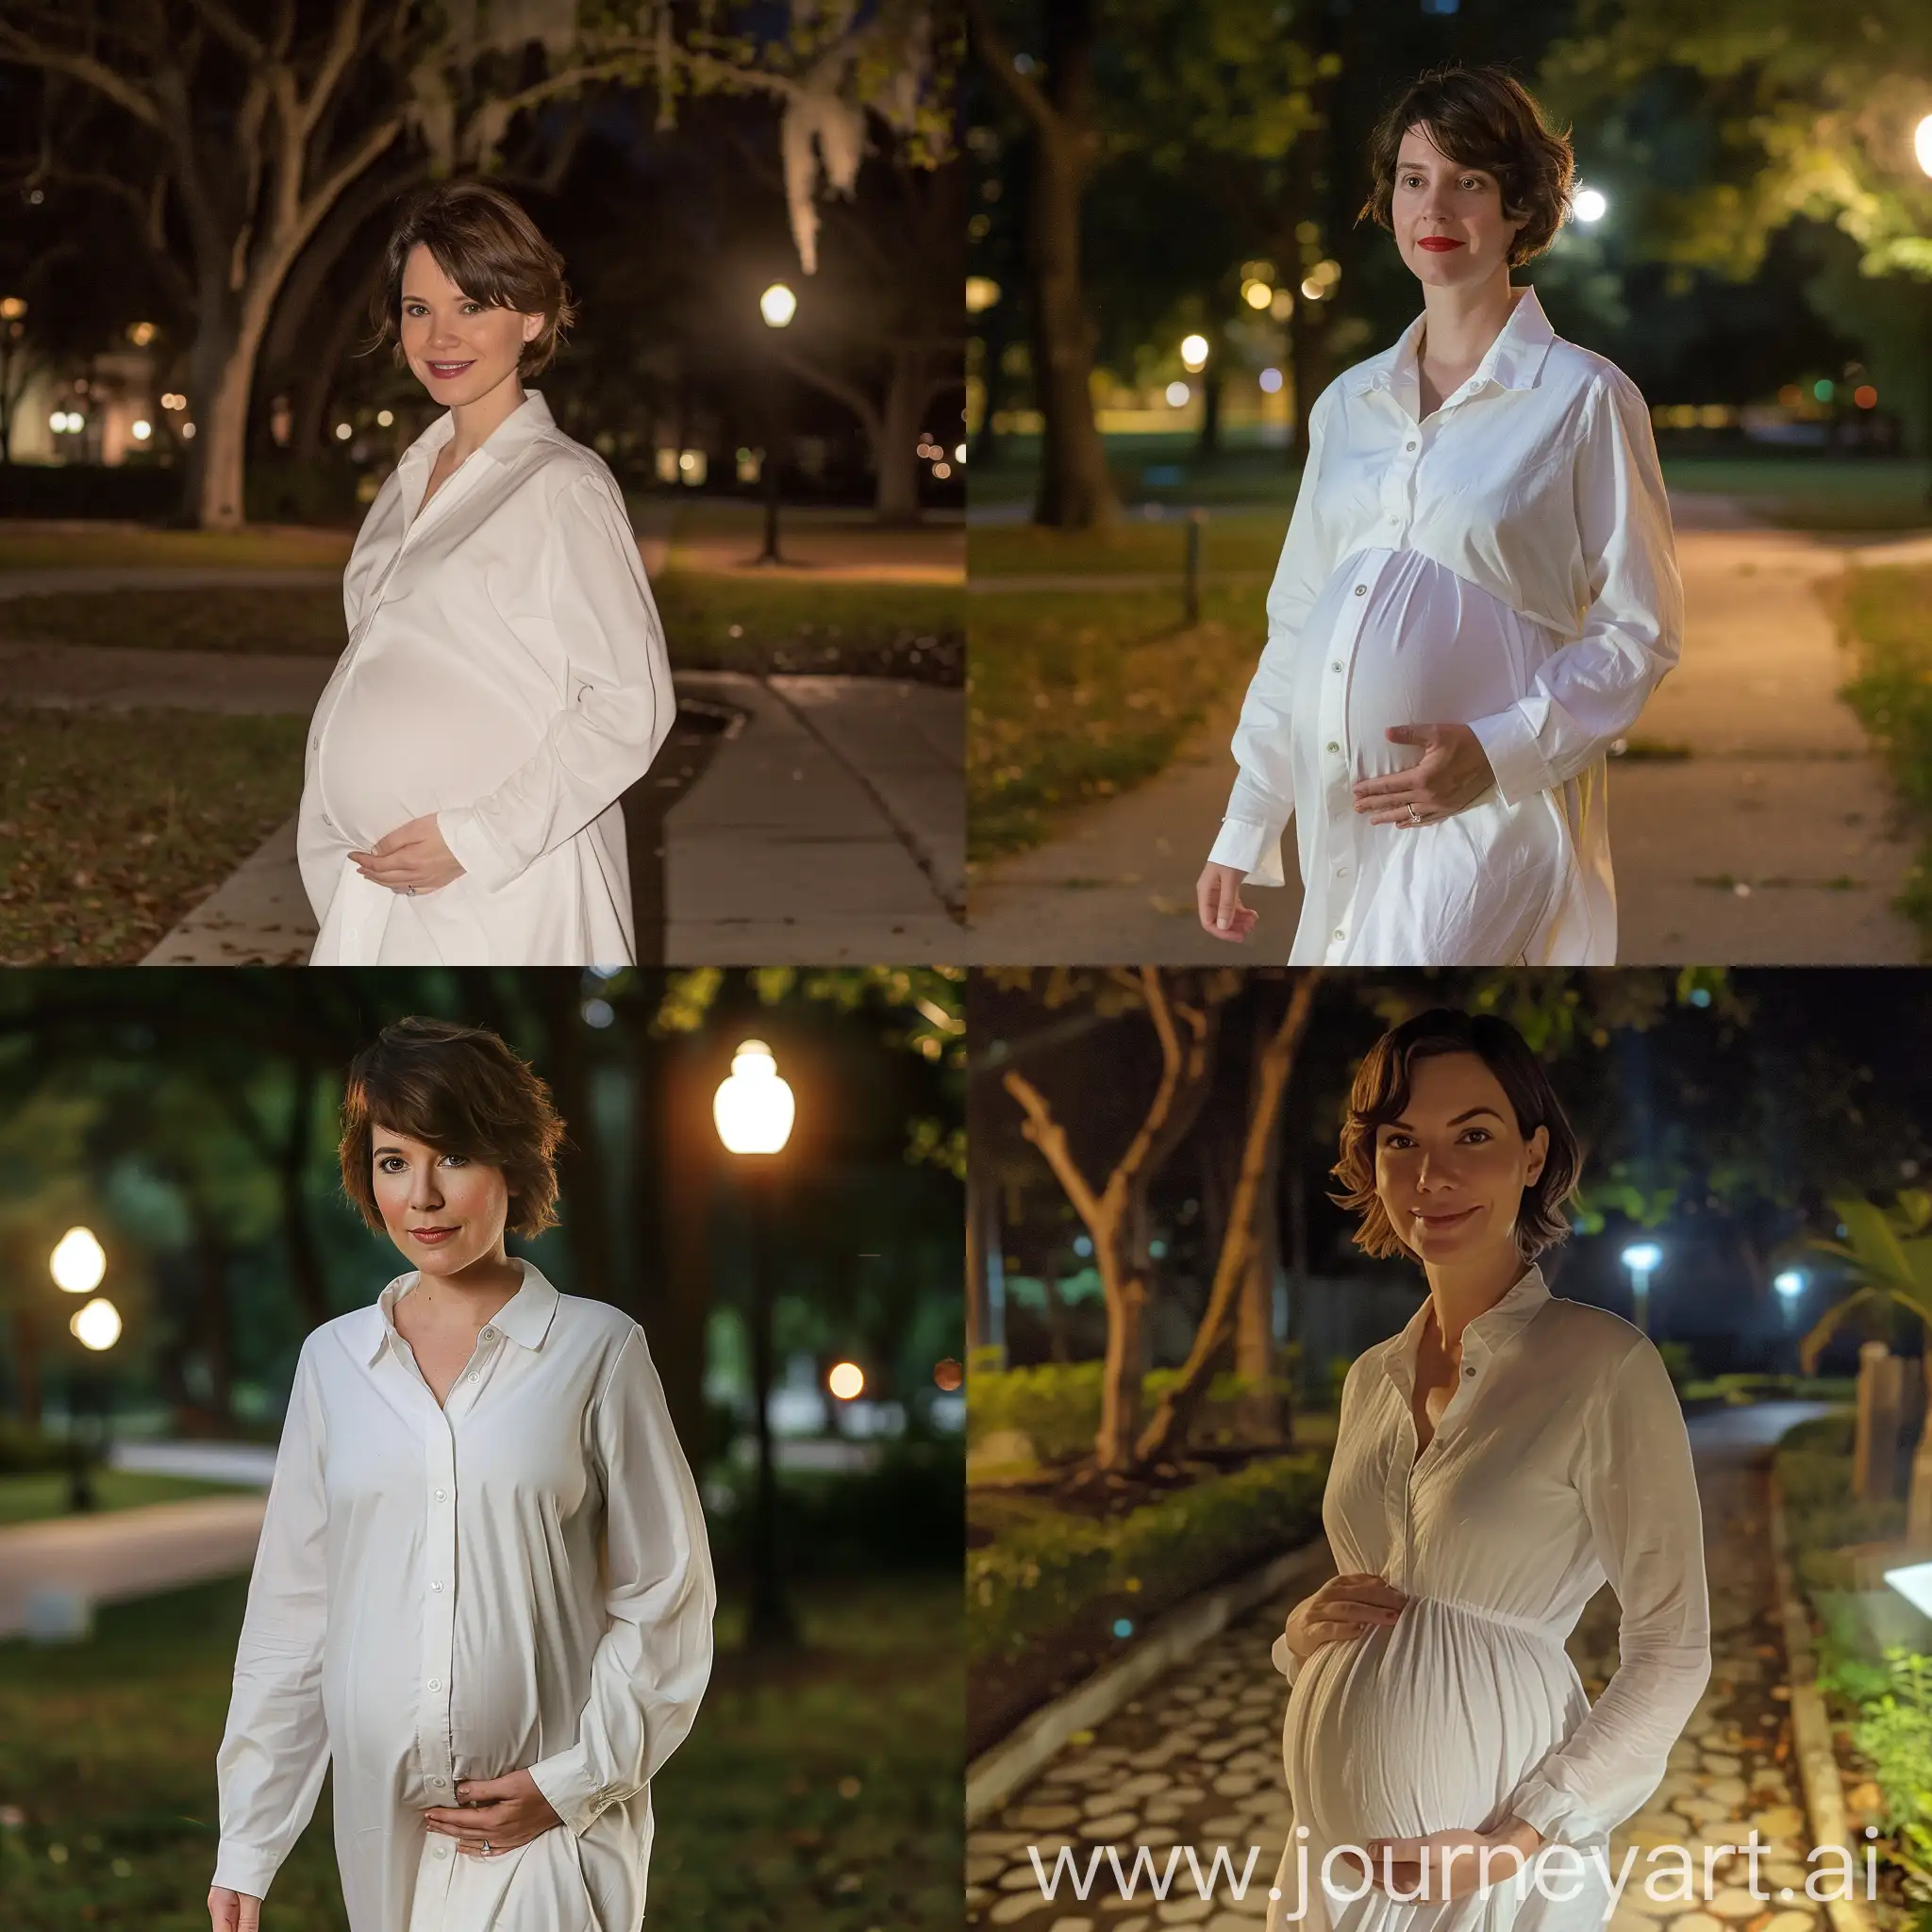 Pregnant-Woman-Walking-in-Park-at-Night